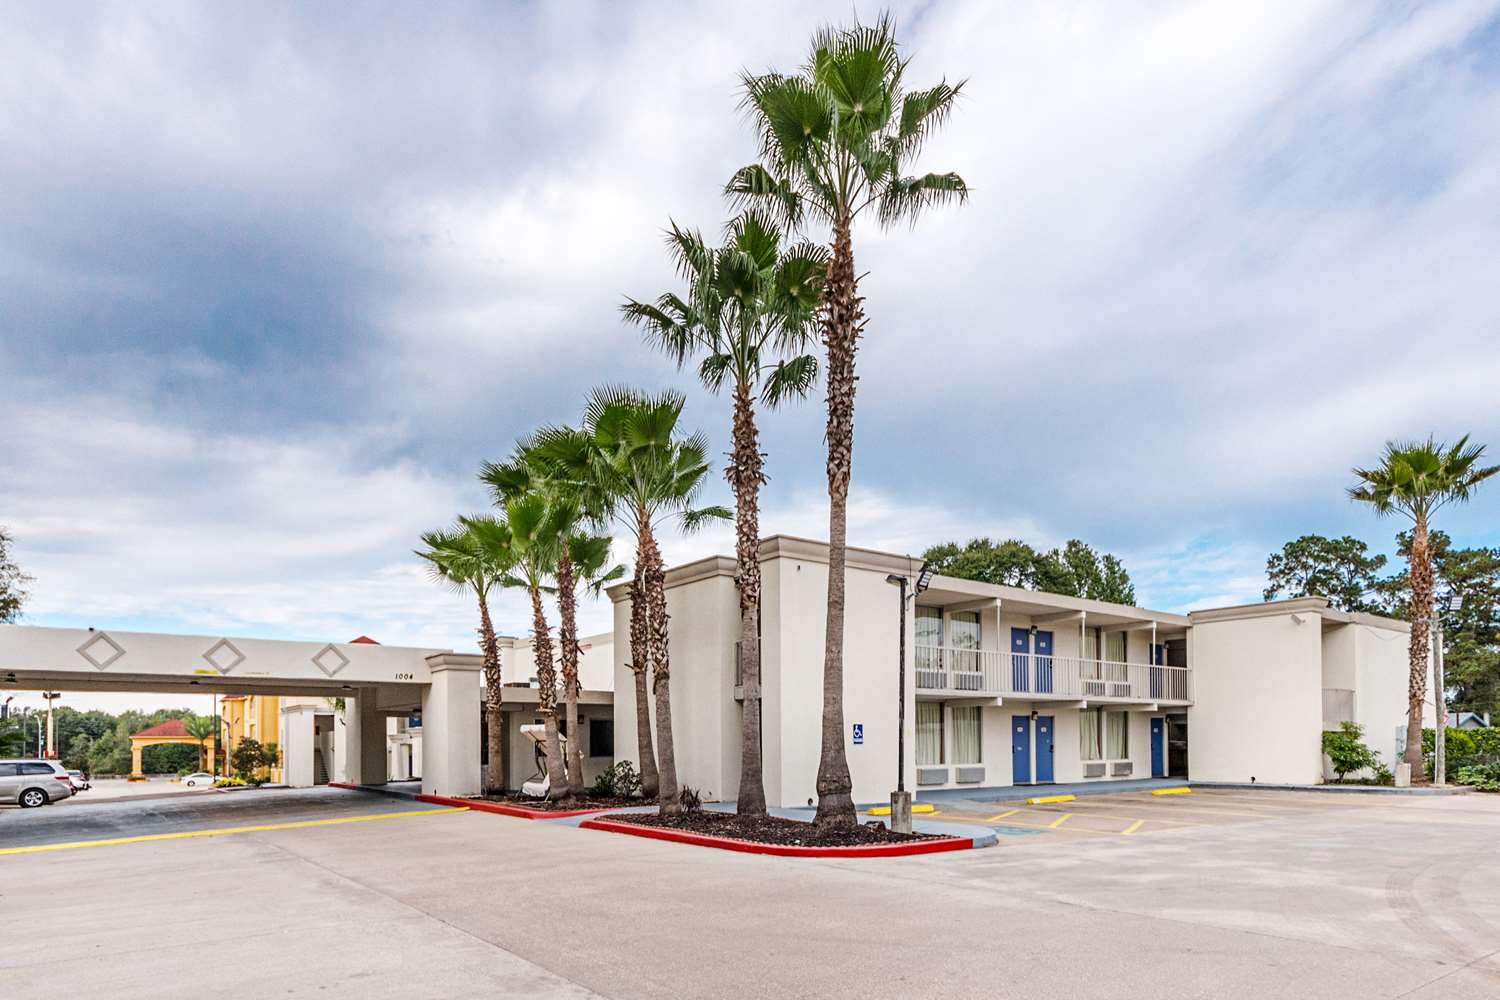 Pet Friendly Motel 6 Cleveland Tx in Cleveland, Texas